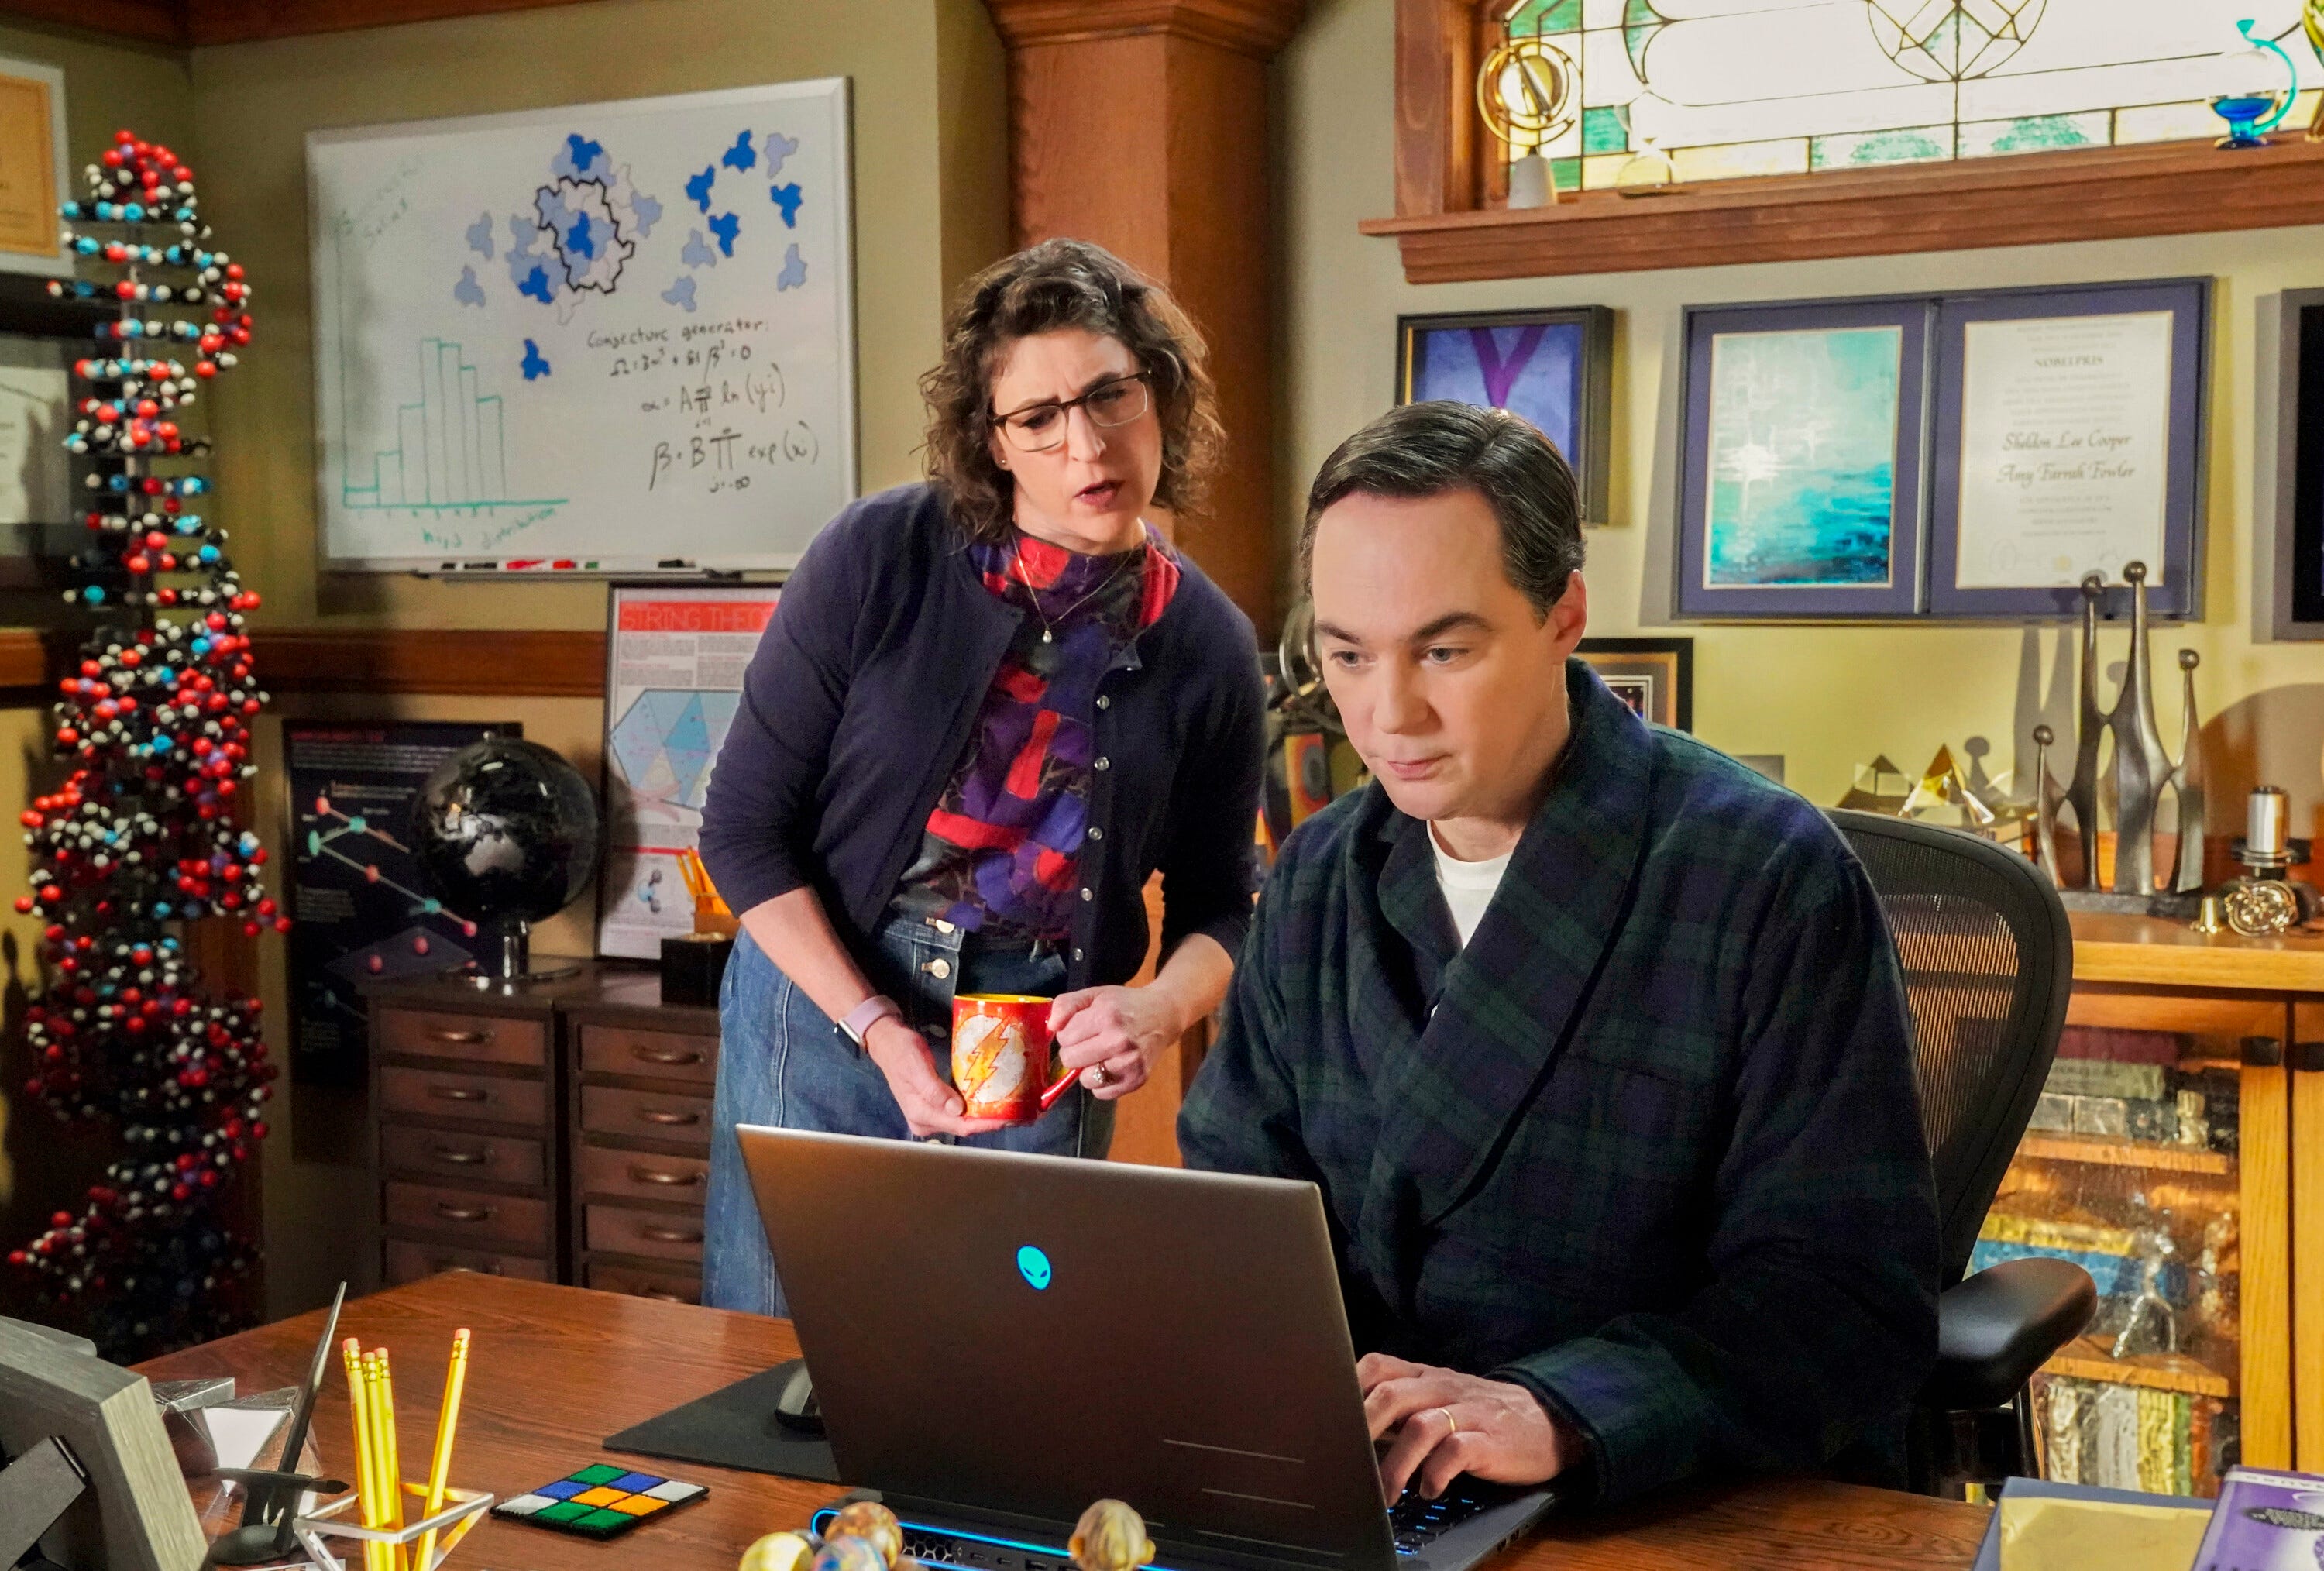 'BBT' Fans Are Convinced They Know How 'Young Sheldon' Will End Based on This Detail